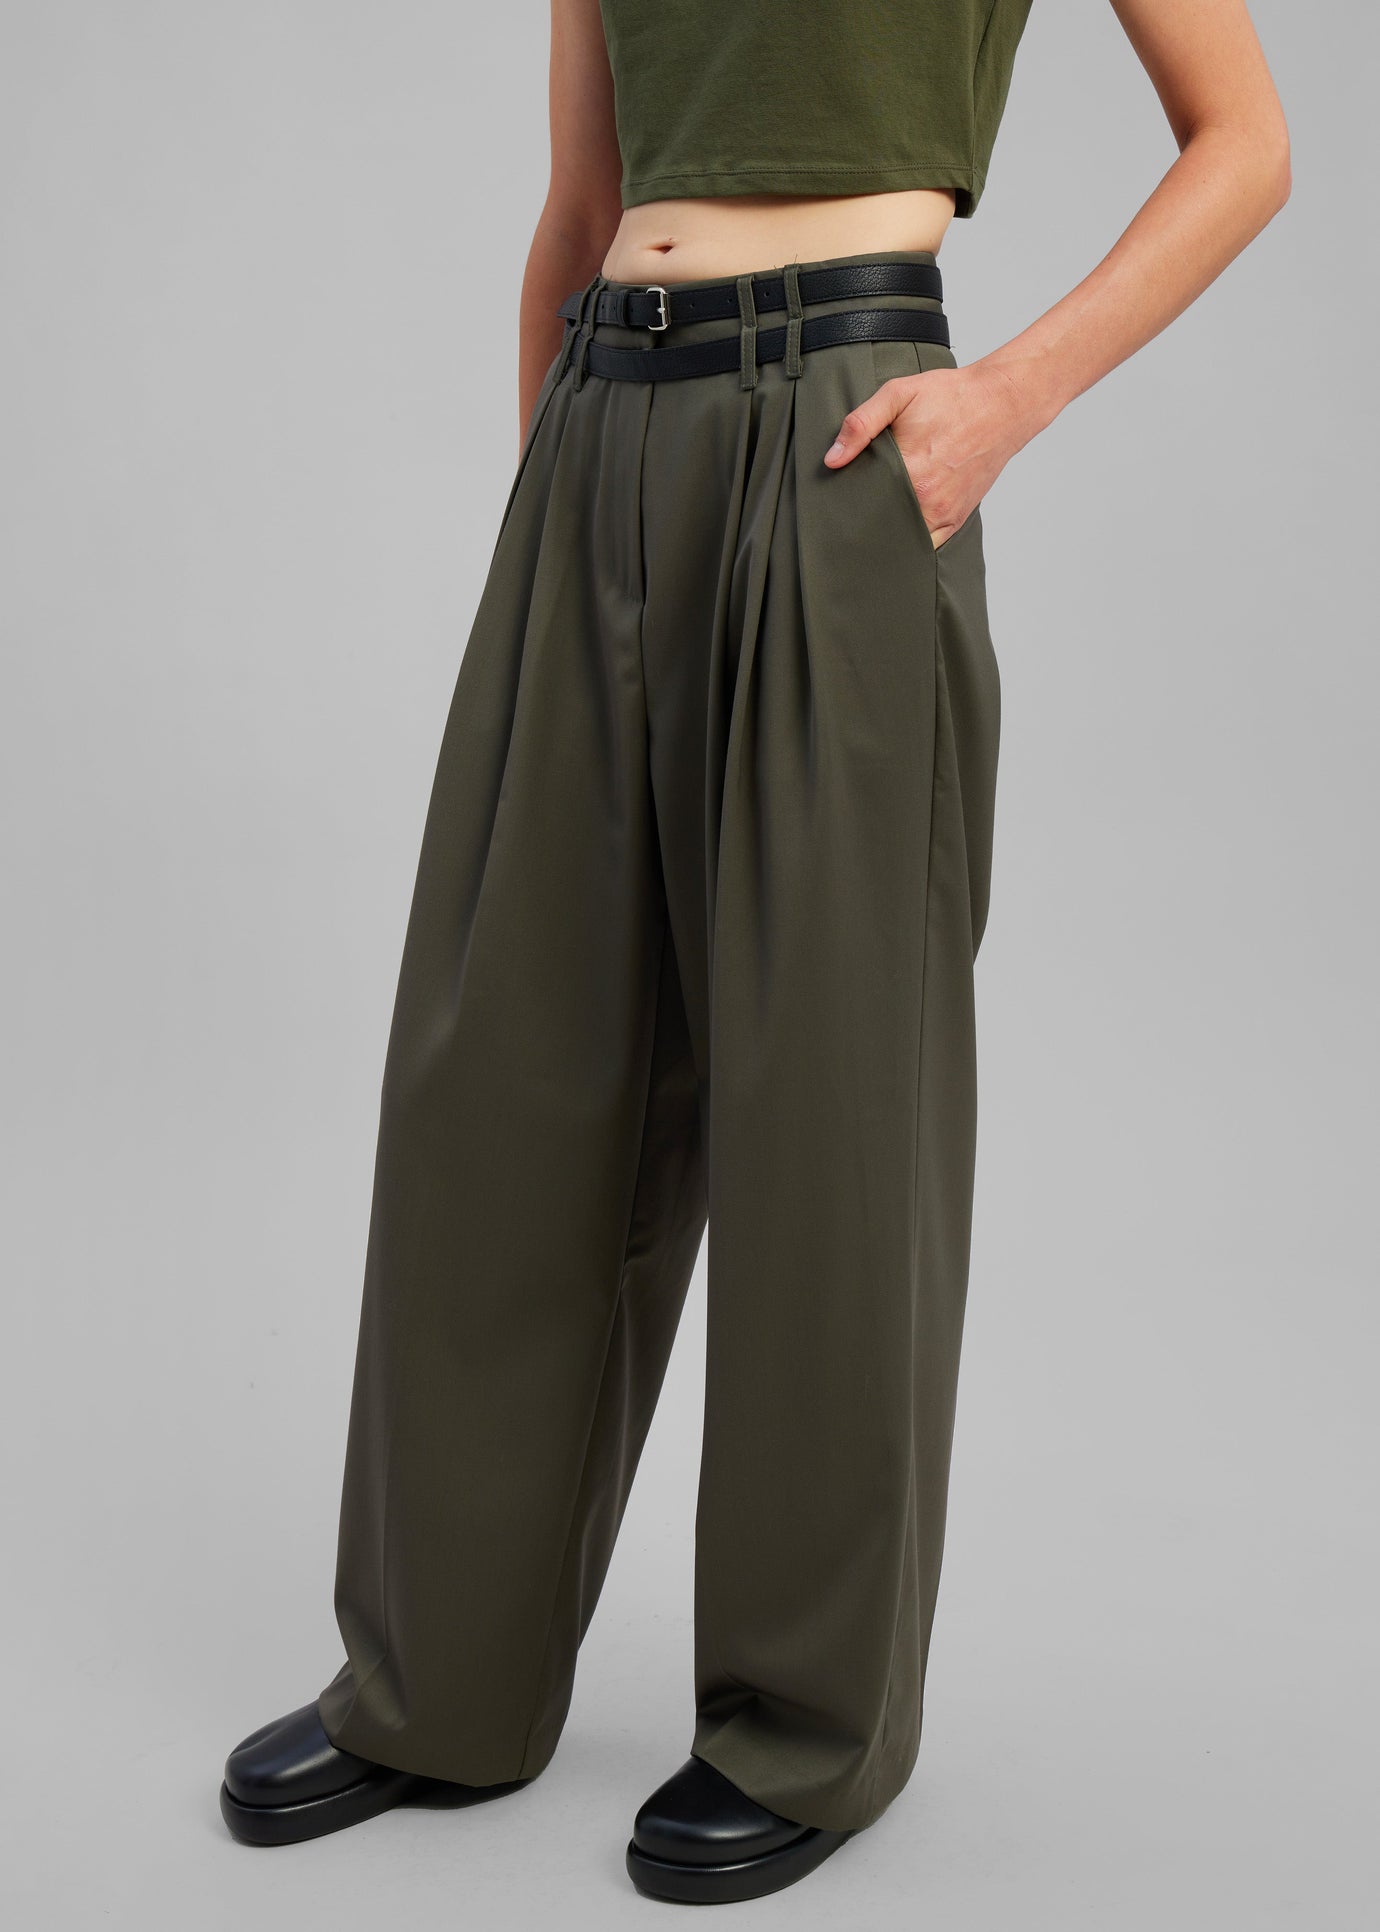 Nellie Belted Pleated Pants - Olive - 1